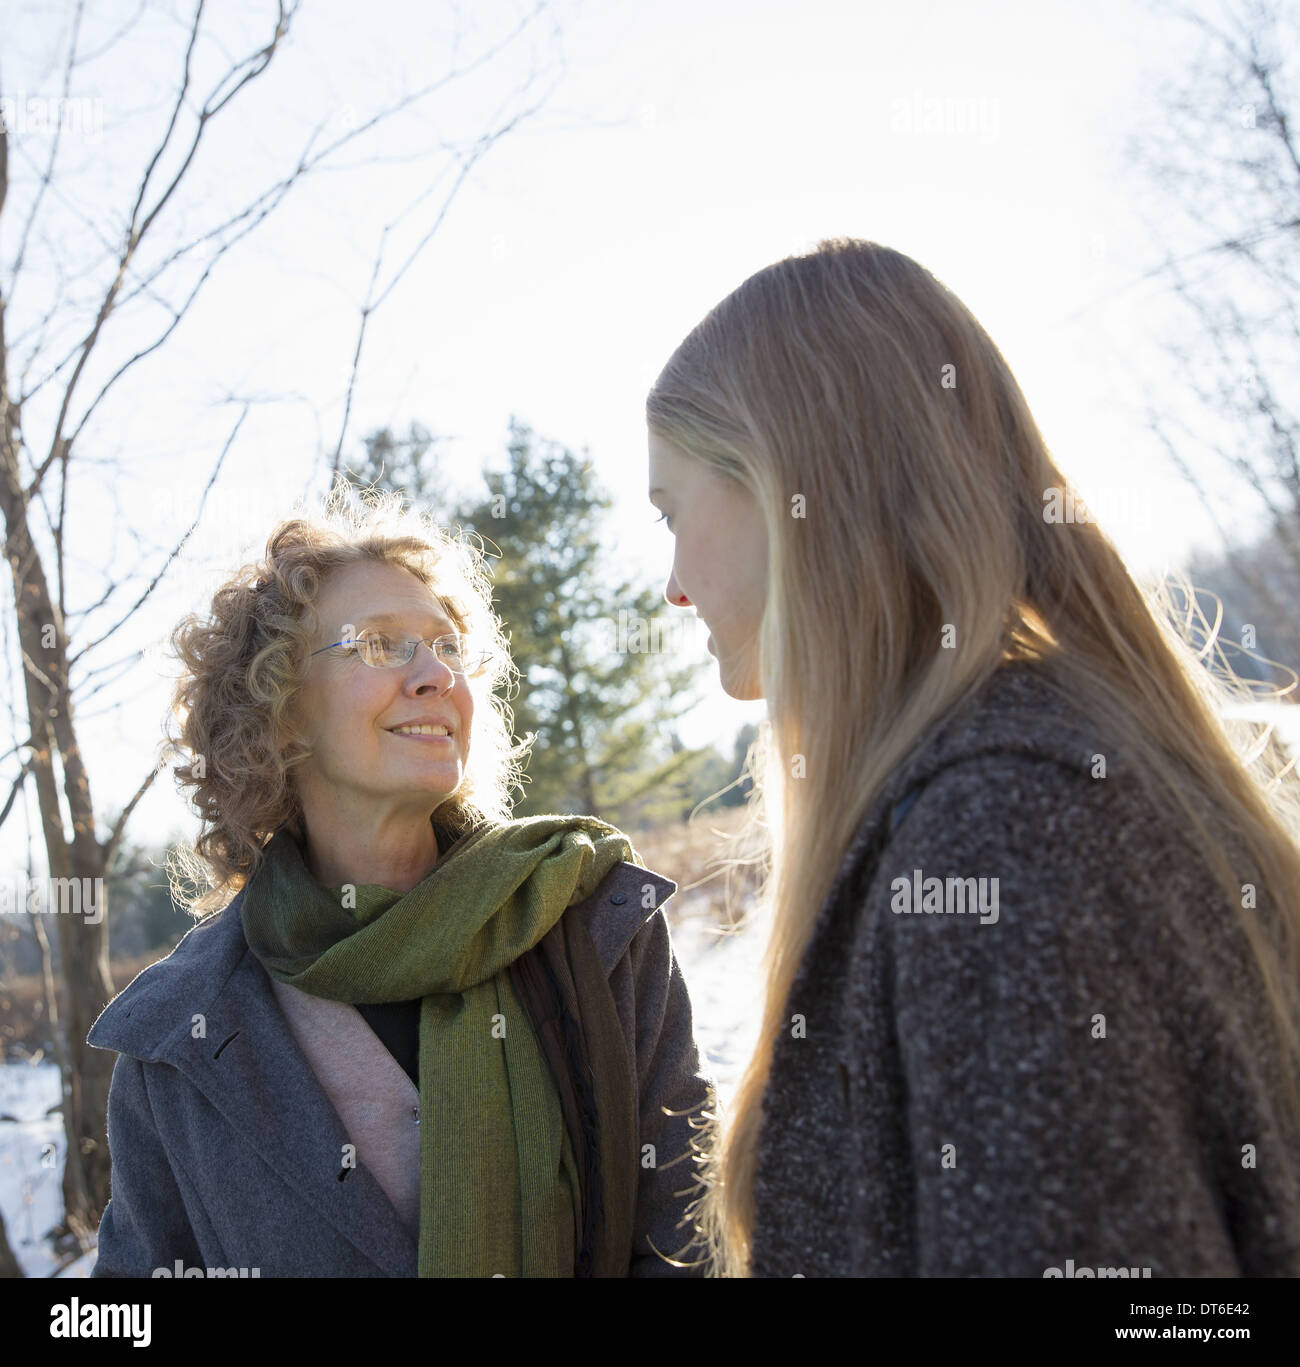 Two women outdoors wearing warm clothes against the cold. Mother and daughter. Stock Photo